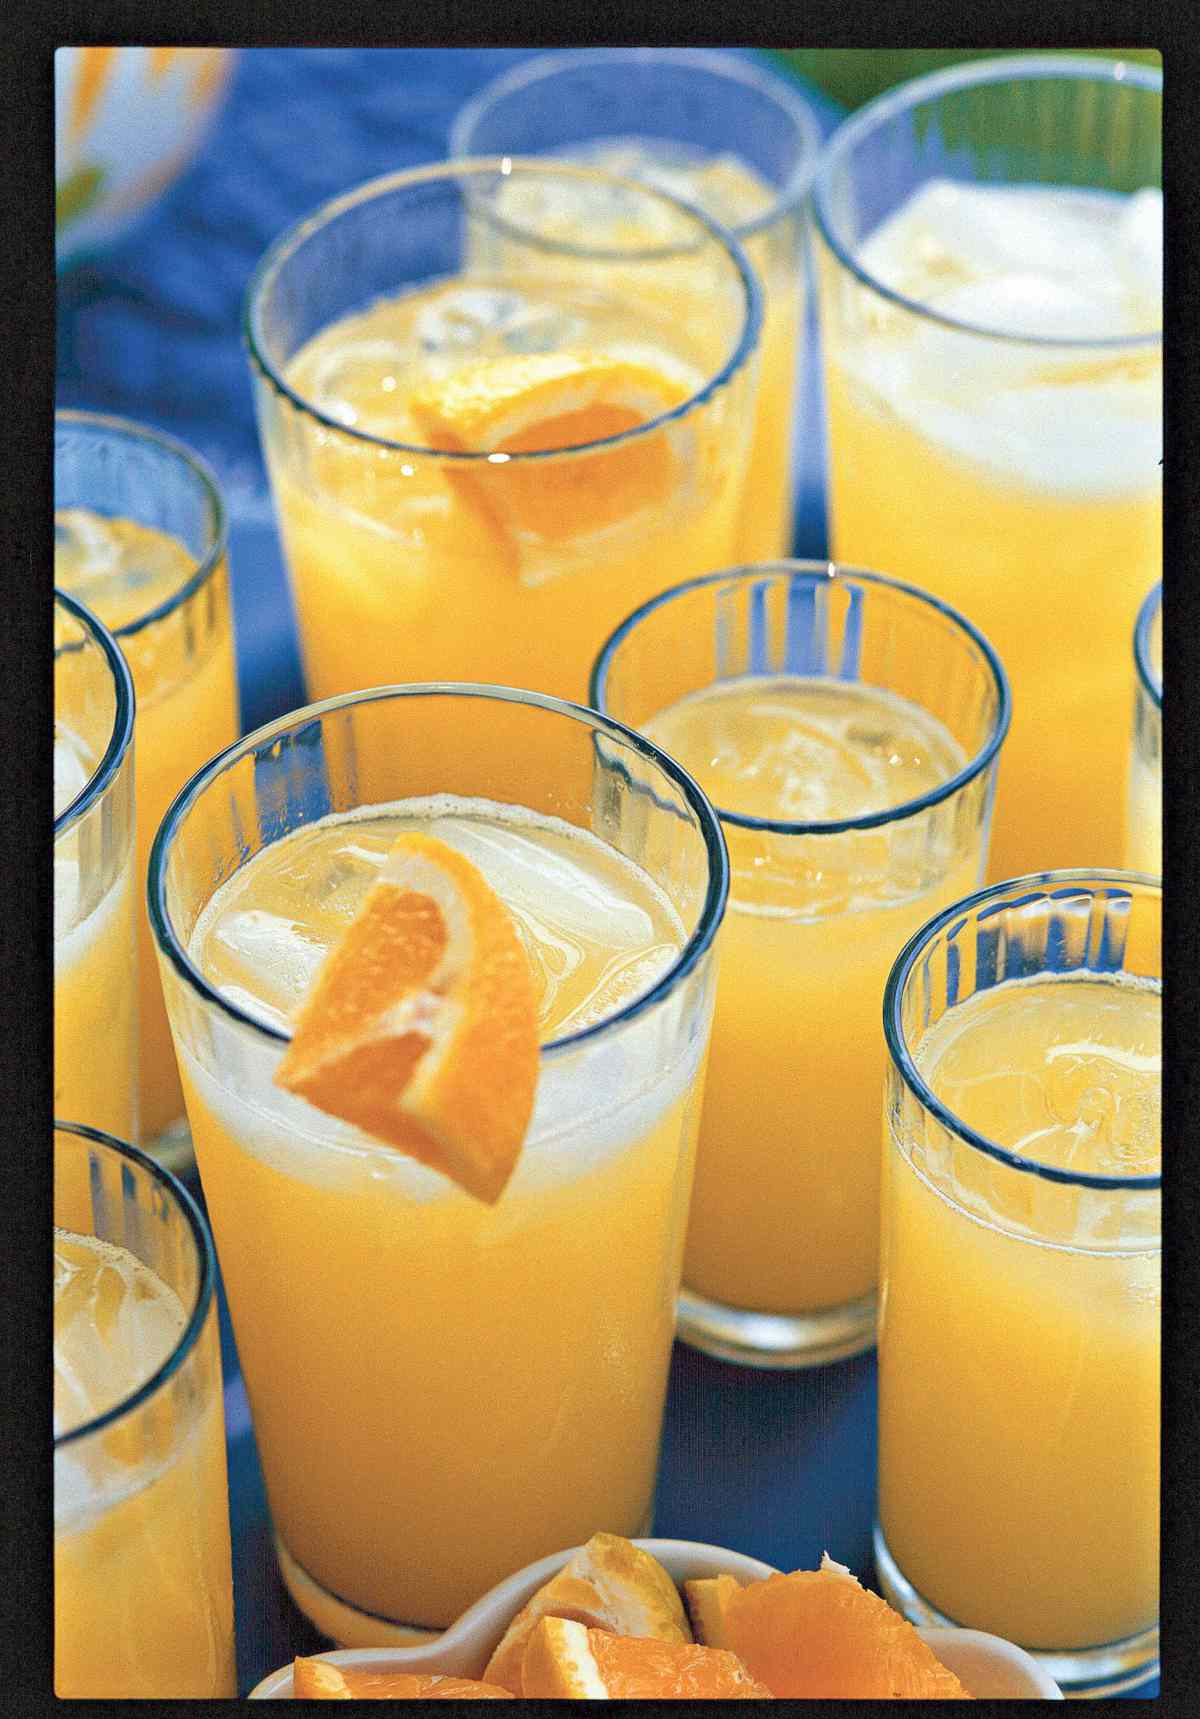 Punch and Cocktail Summer Drink Recipes: Homemade Orange Soda